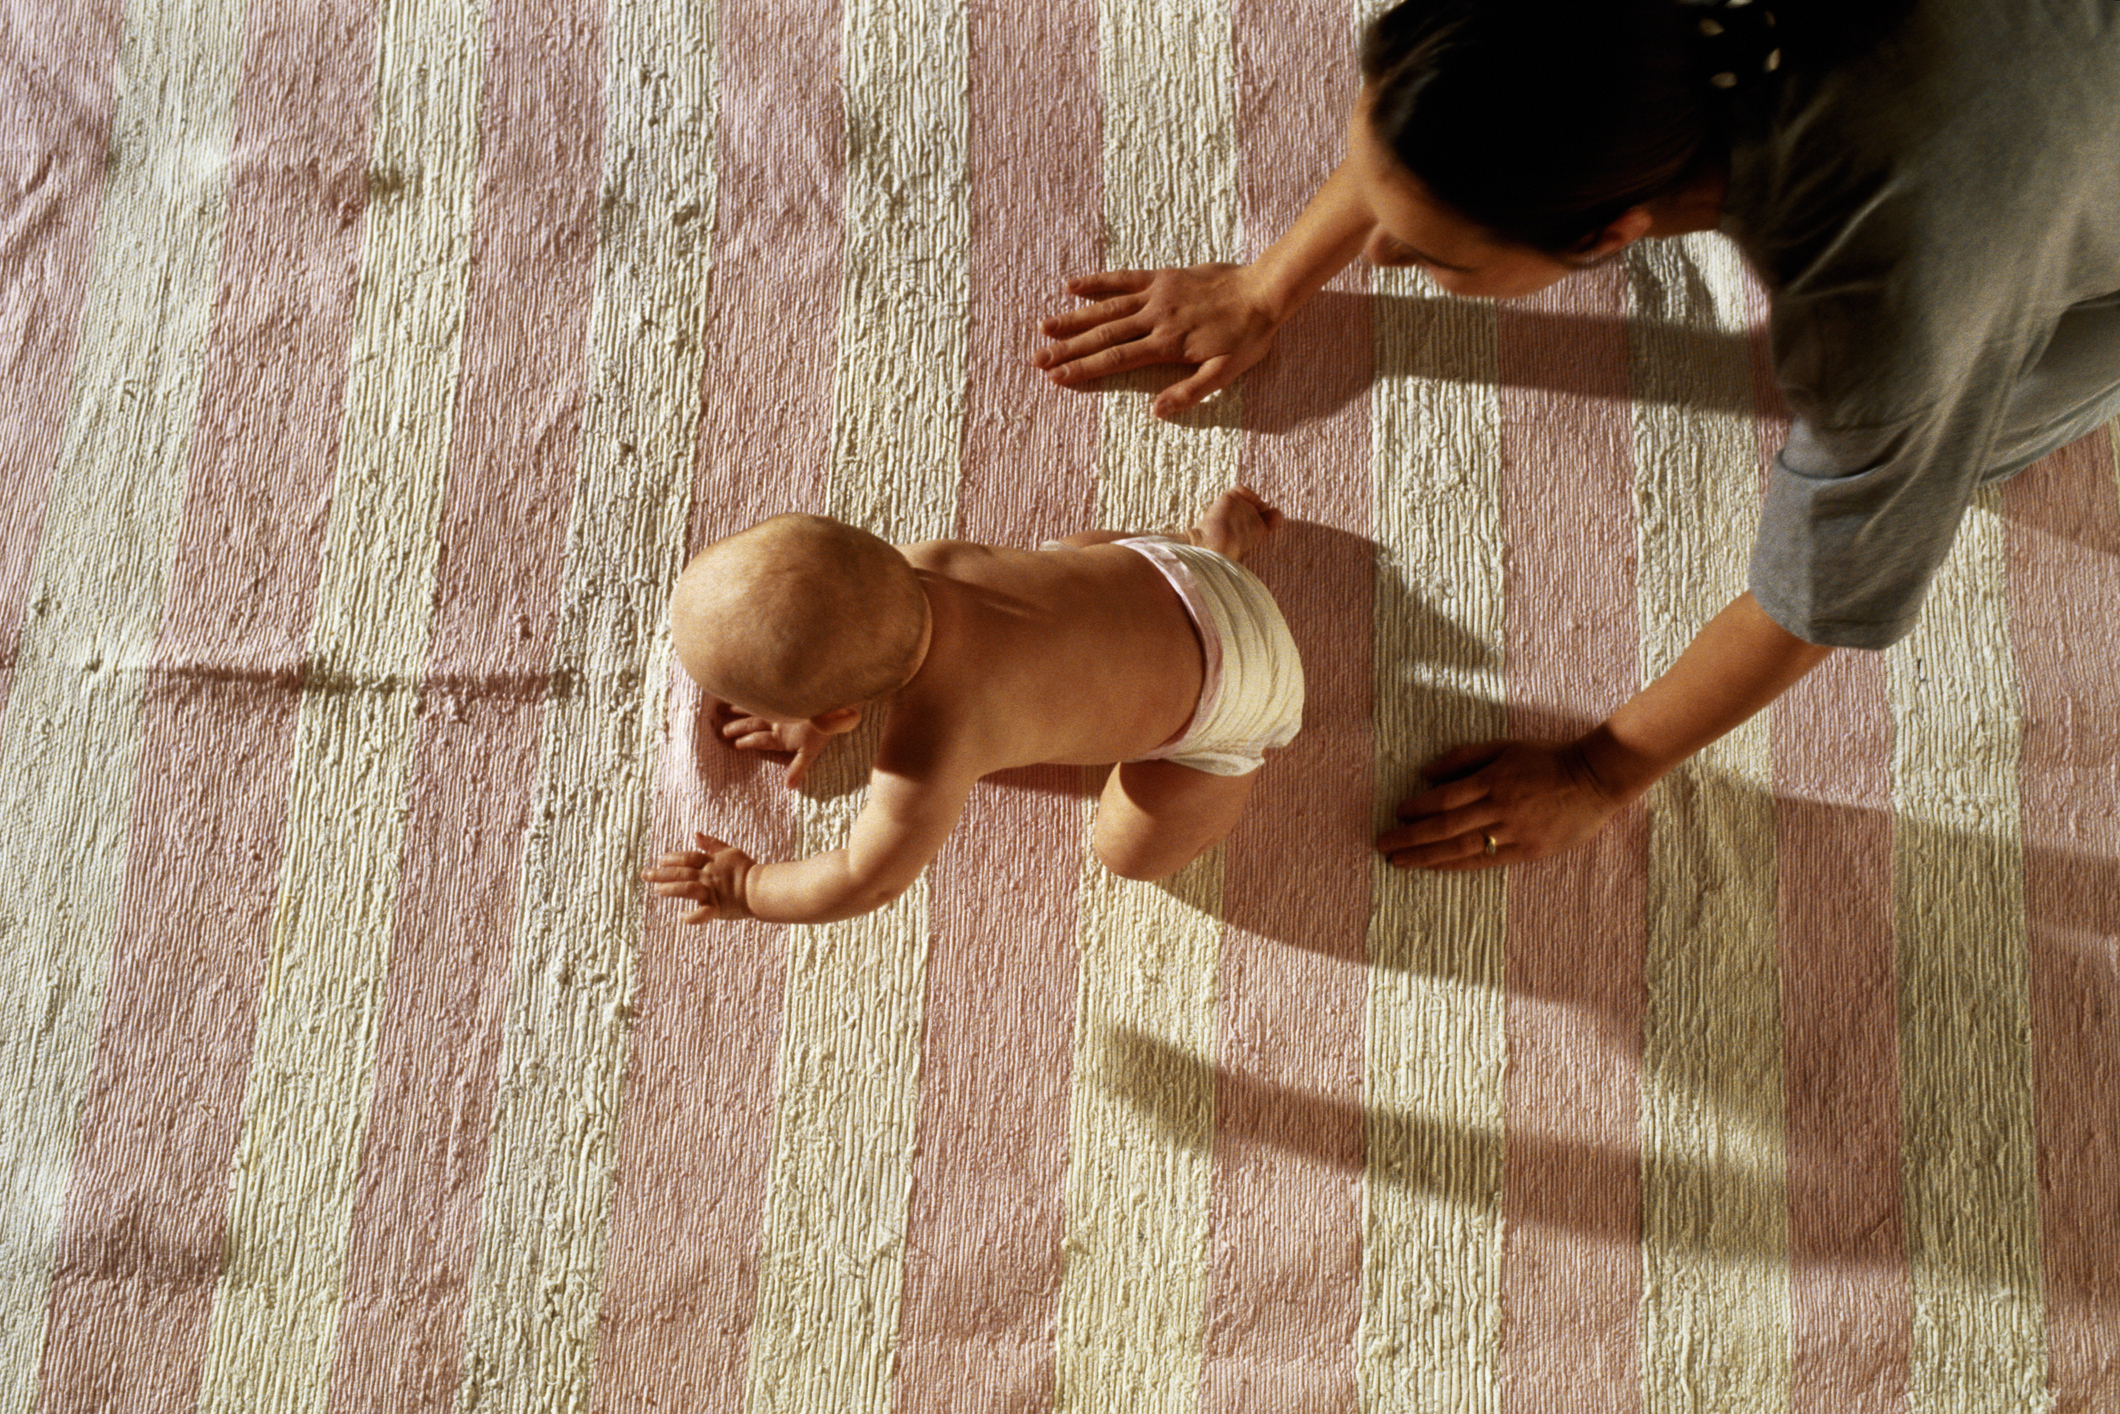 Adult supervising a baby crawling on a carpeted floor